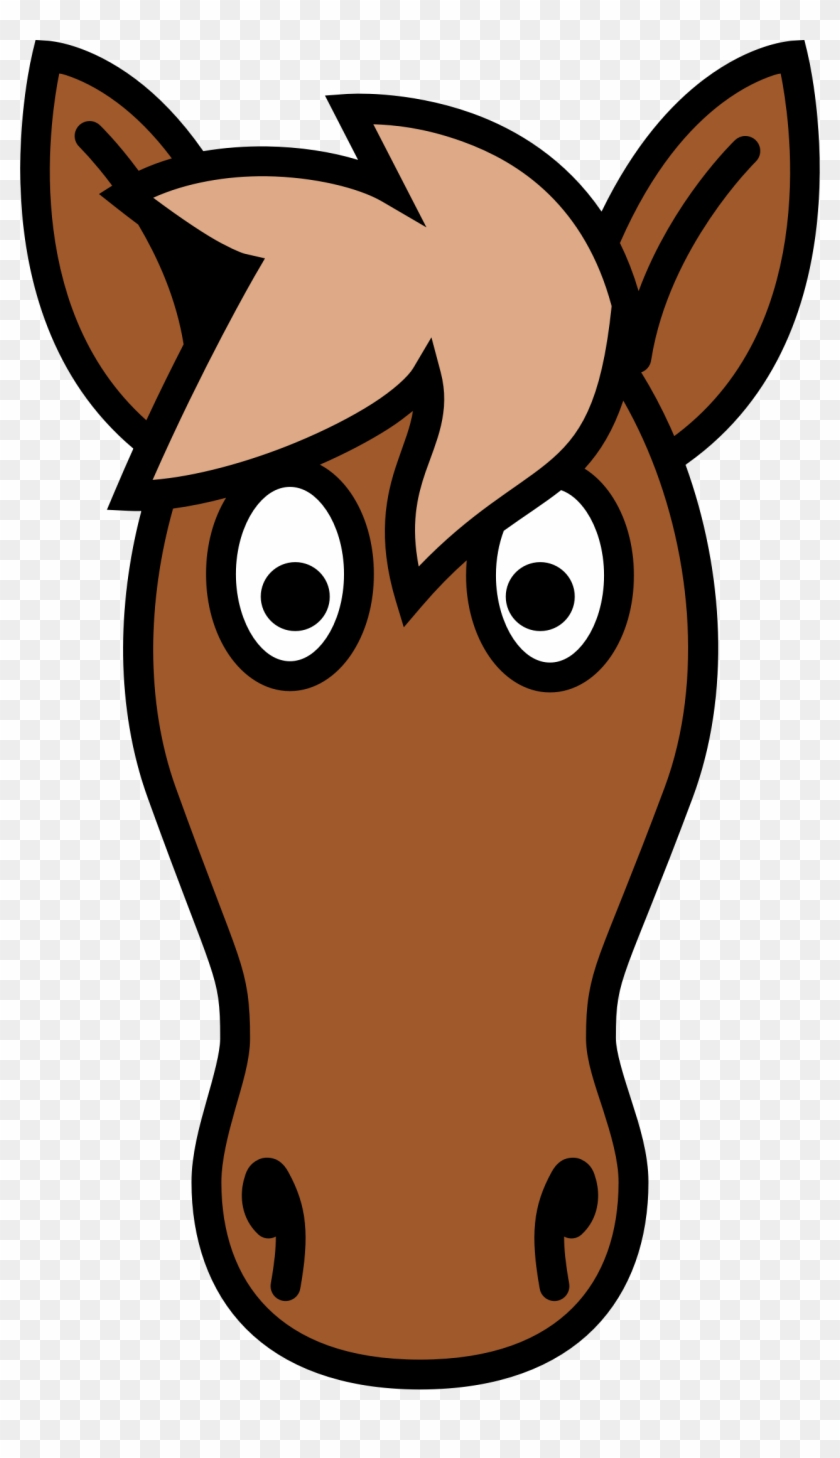 Big Image - Simple Clipart Horse Head - Png Download #21914